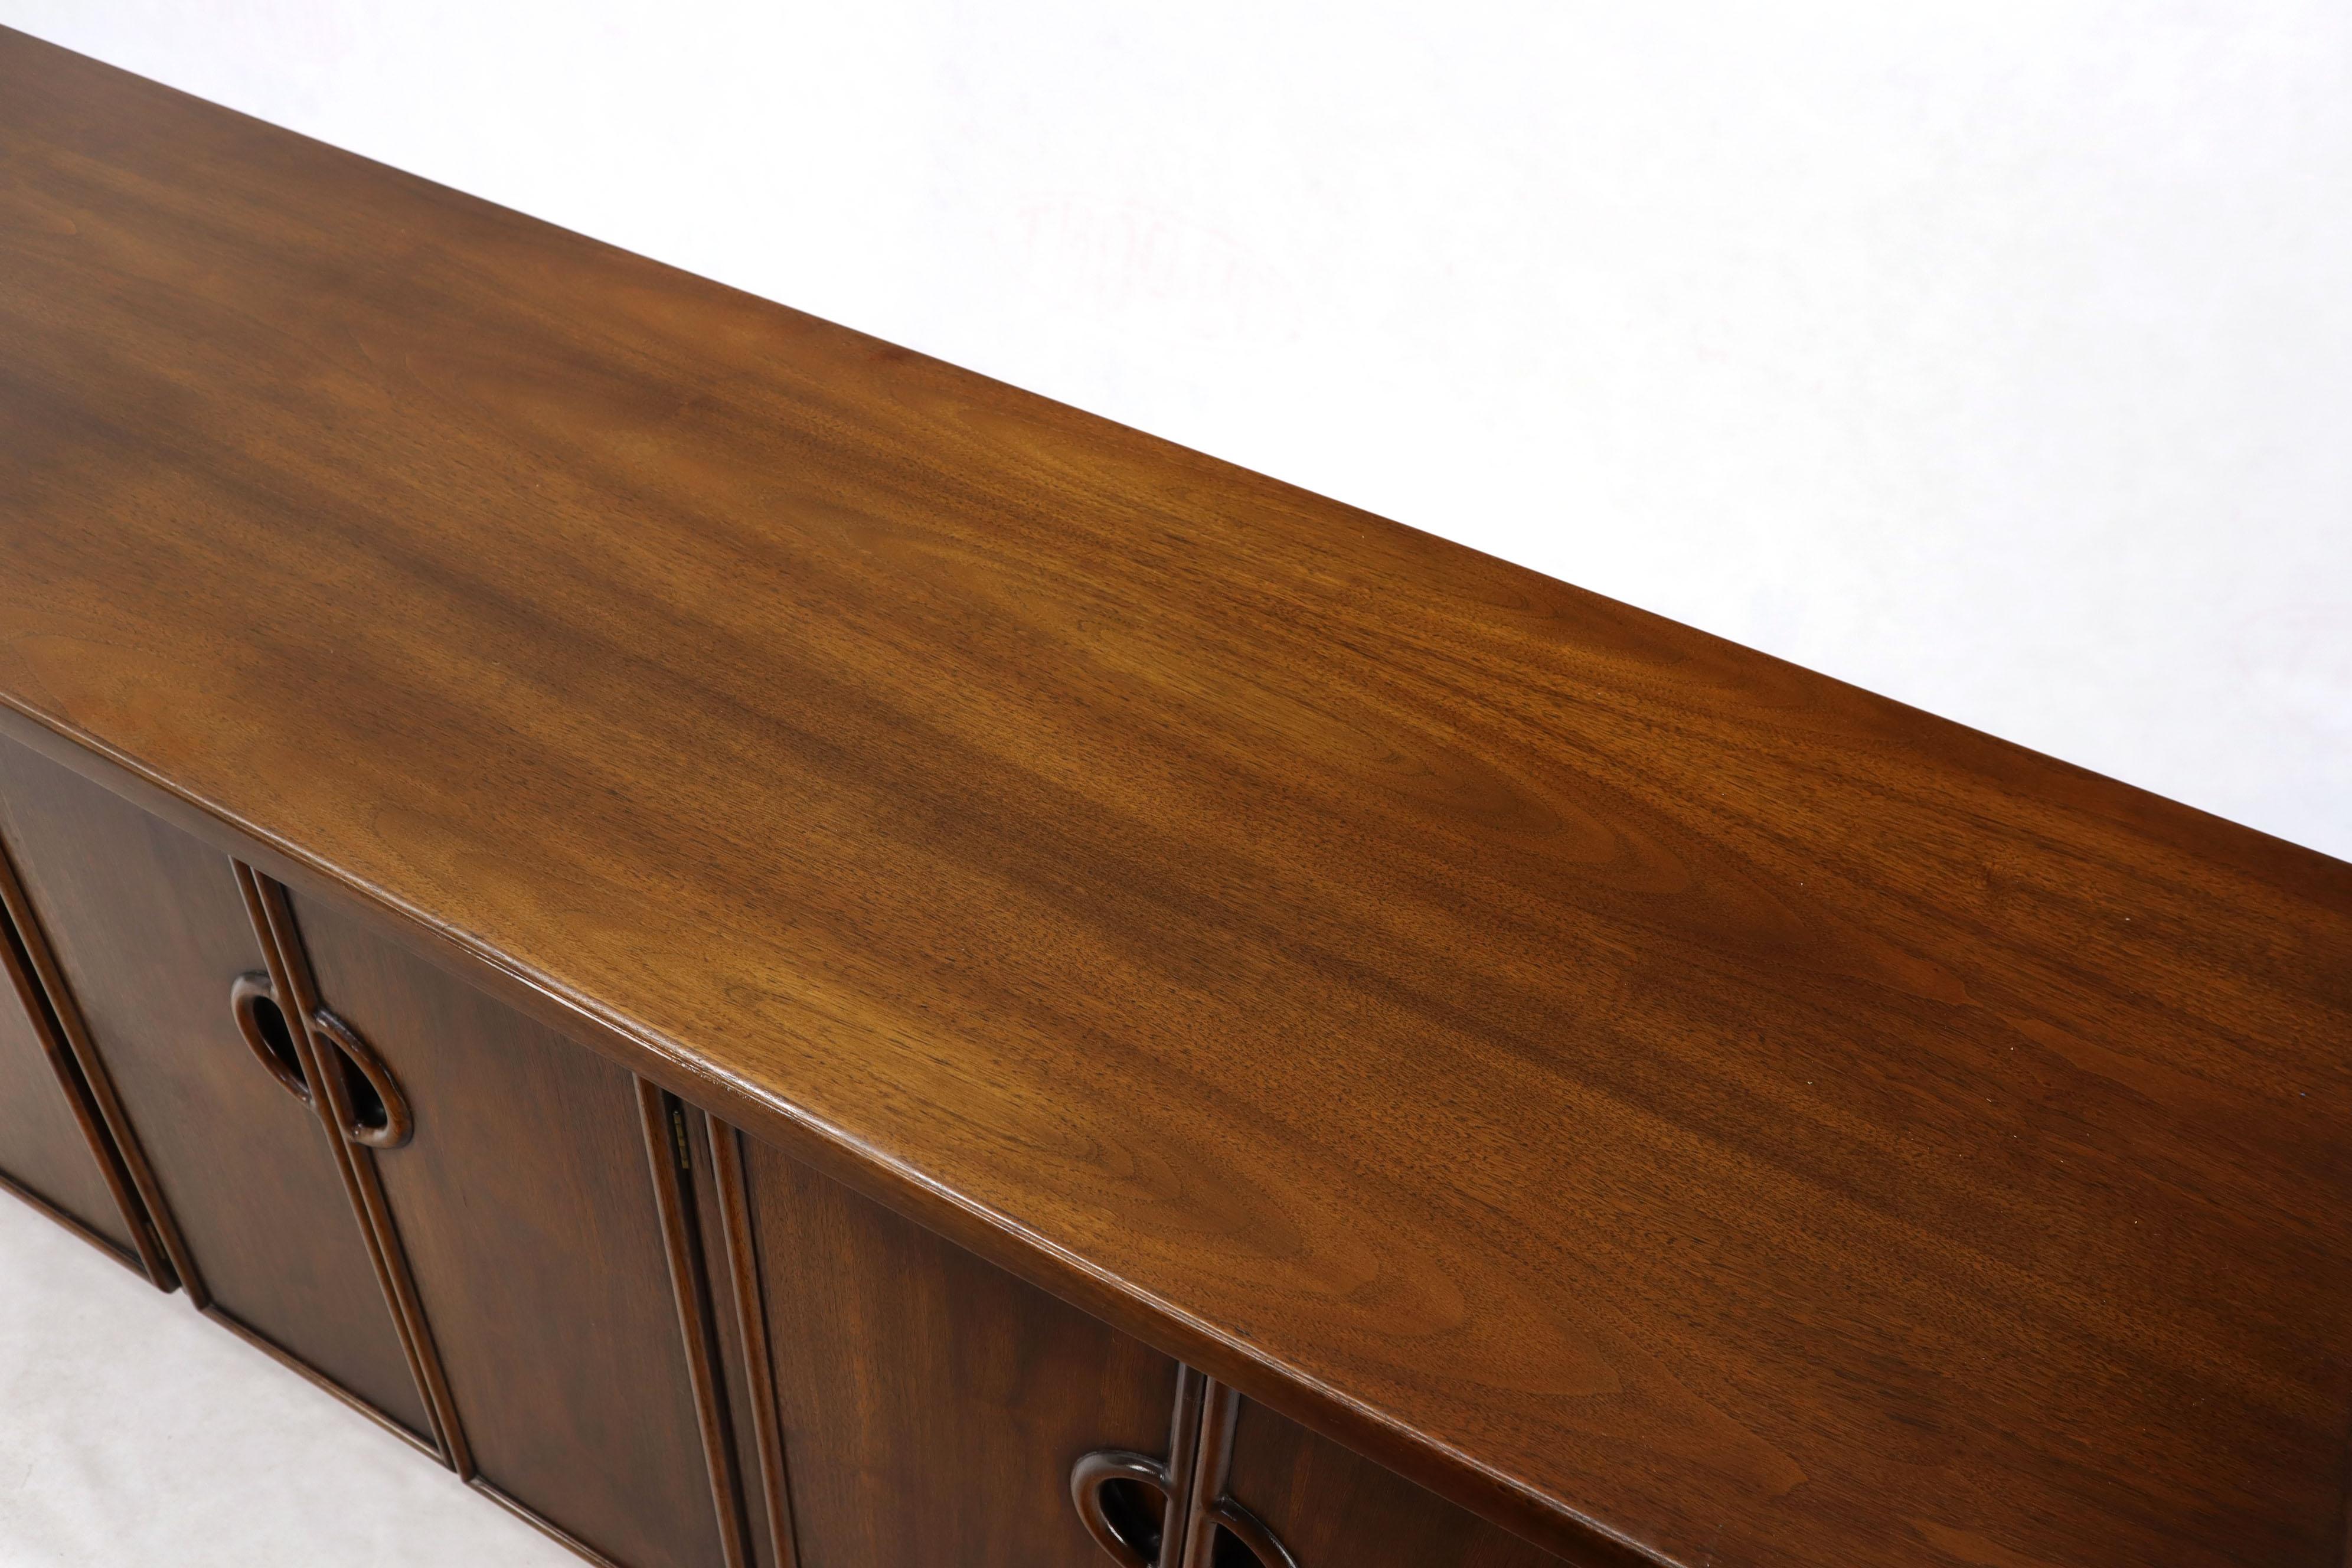 Exposed Sculptural Legs Nine Drawers Long Dresser Credenza In Excellent Condition For Sale In Rockaway, NJ